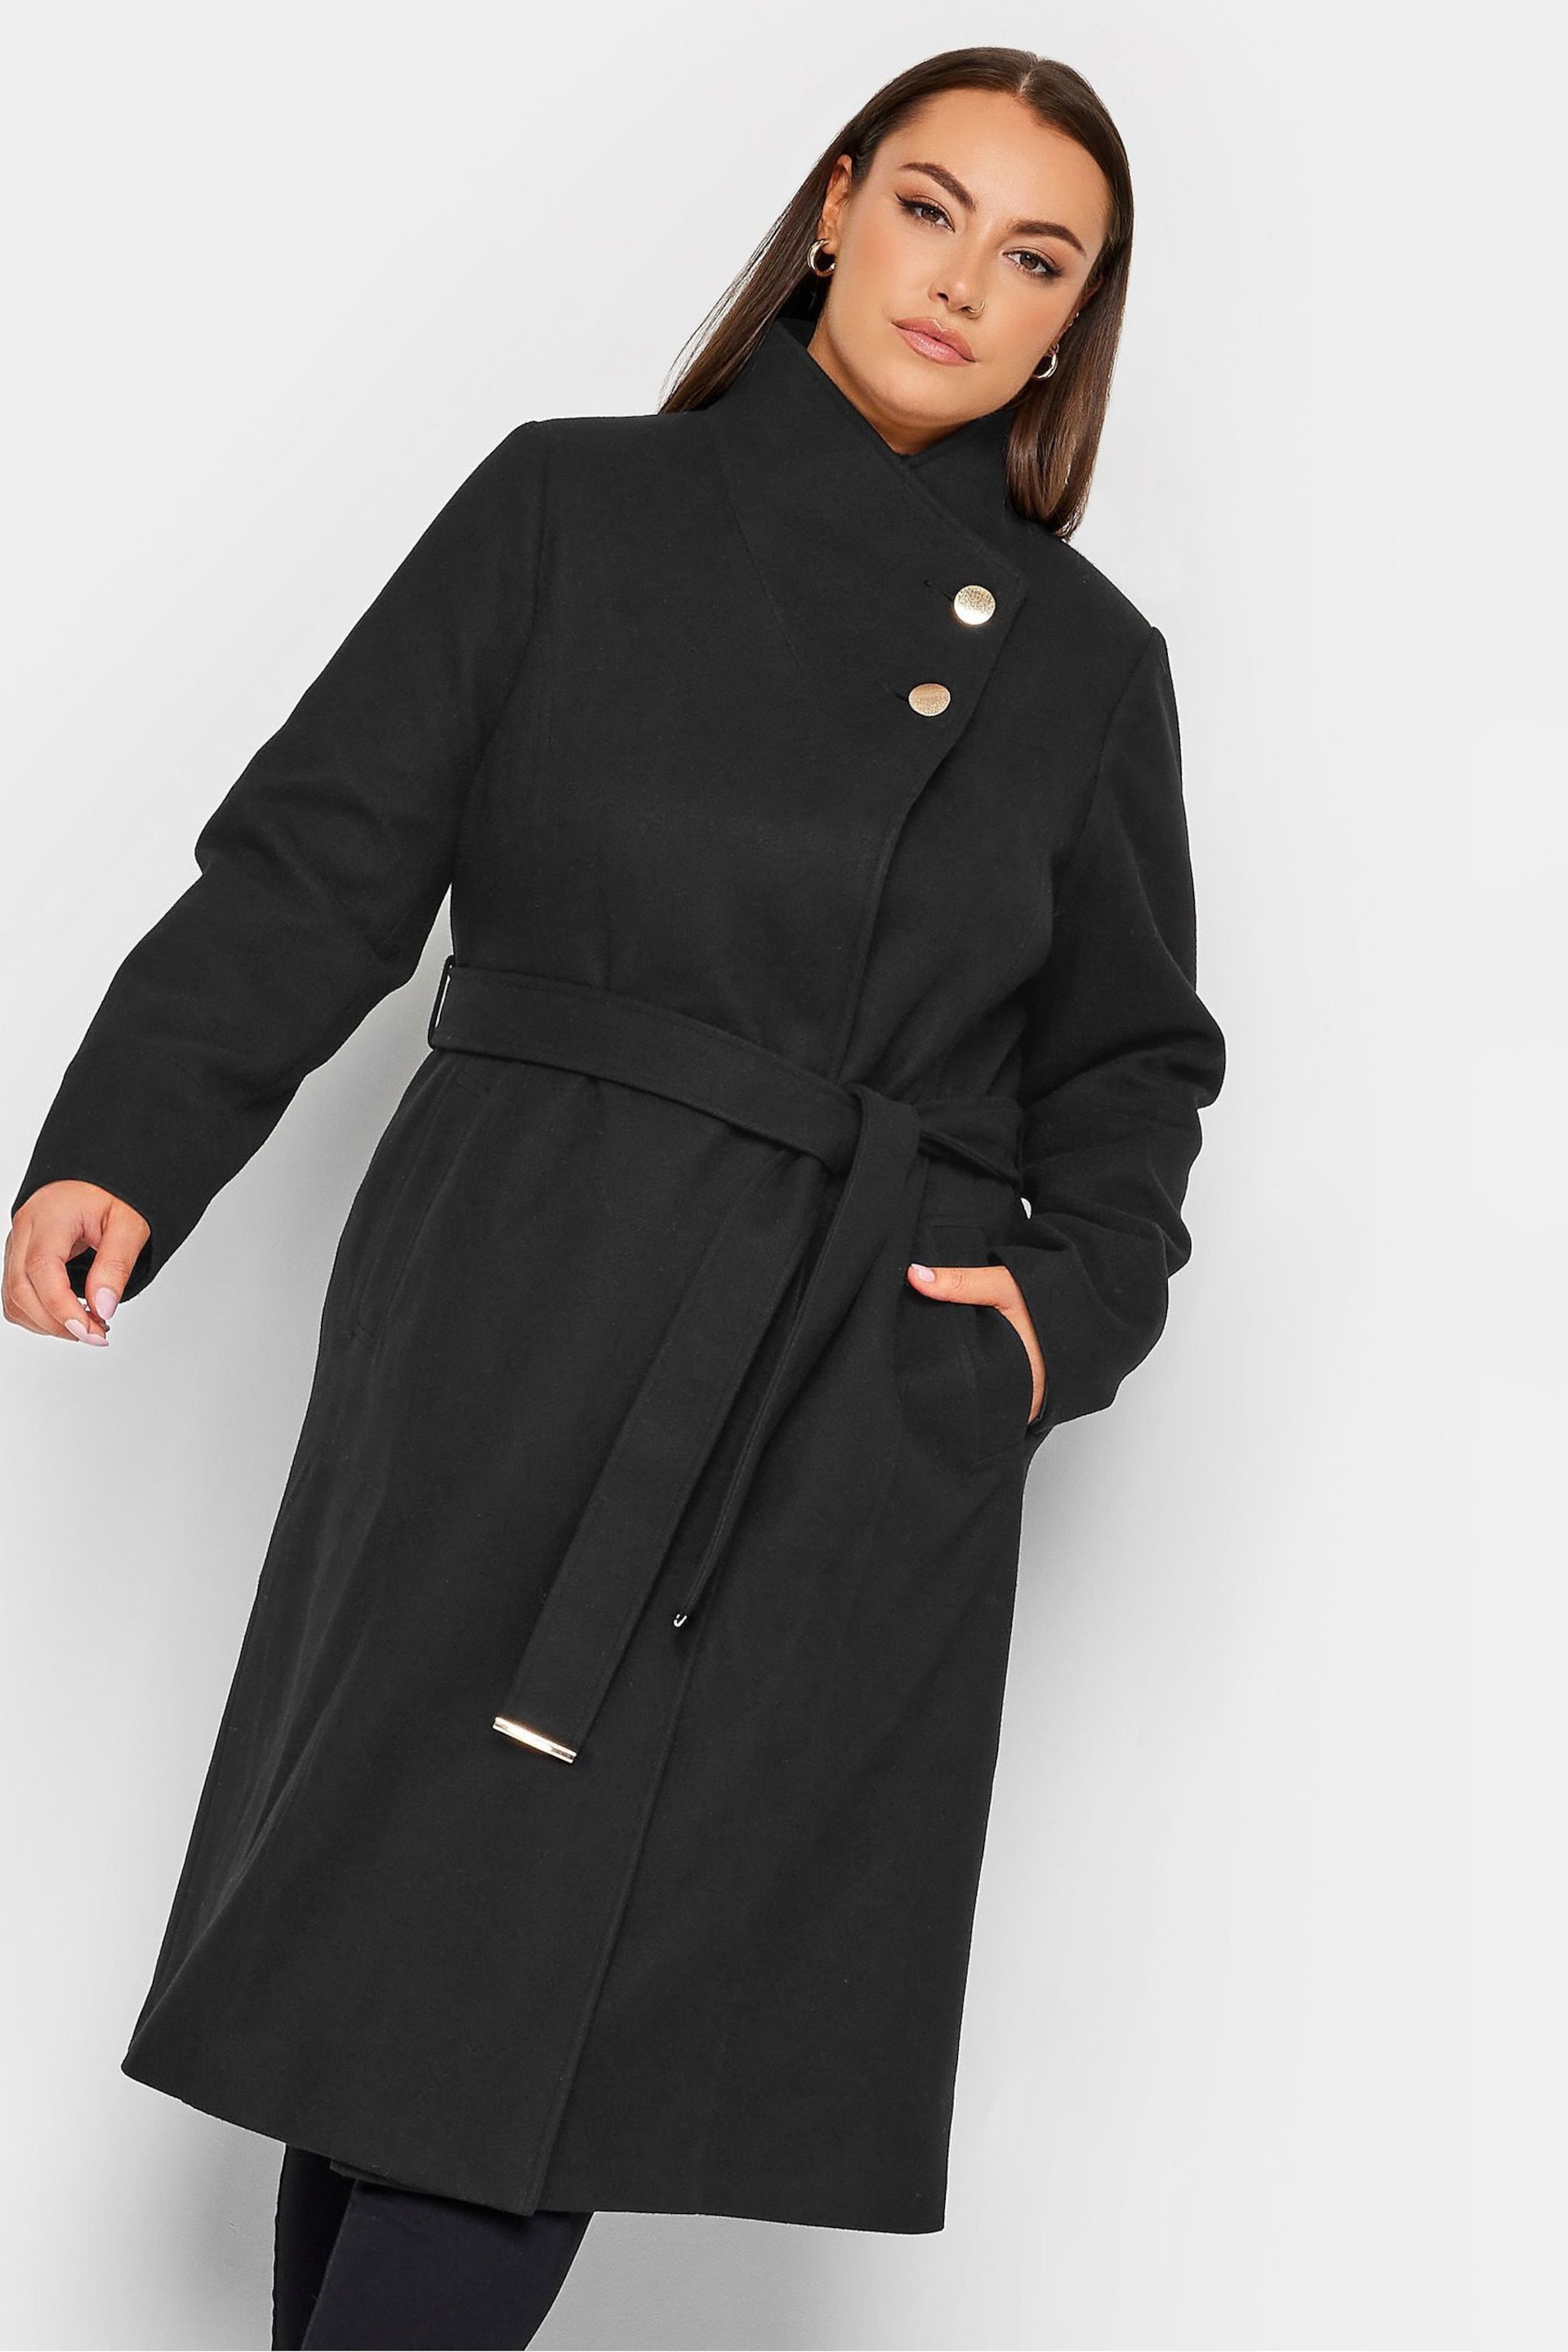 Yours Curve Black Belted Military Coat - Image 2 of 5